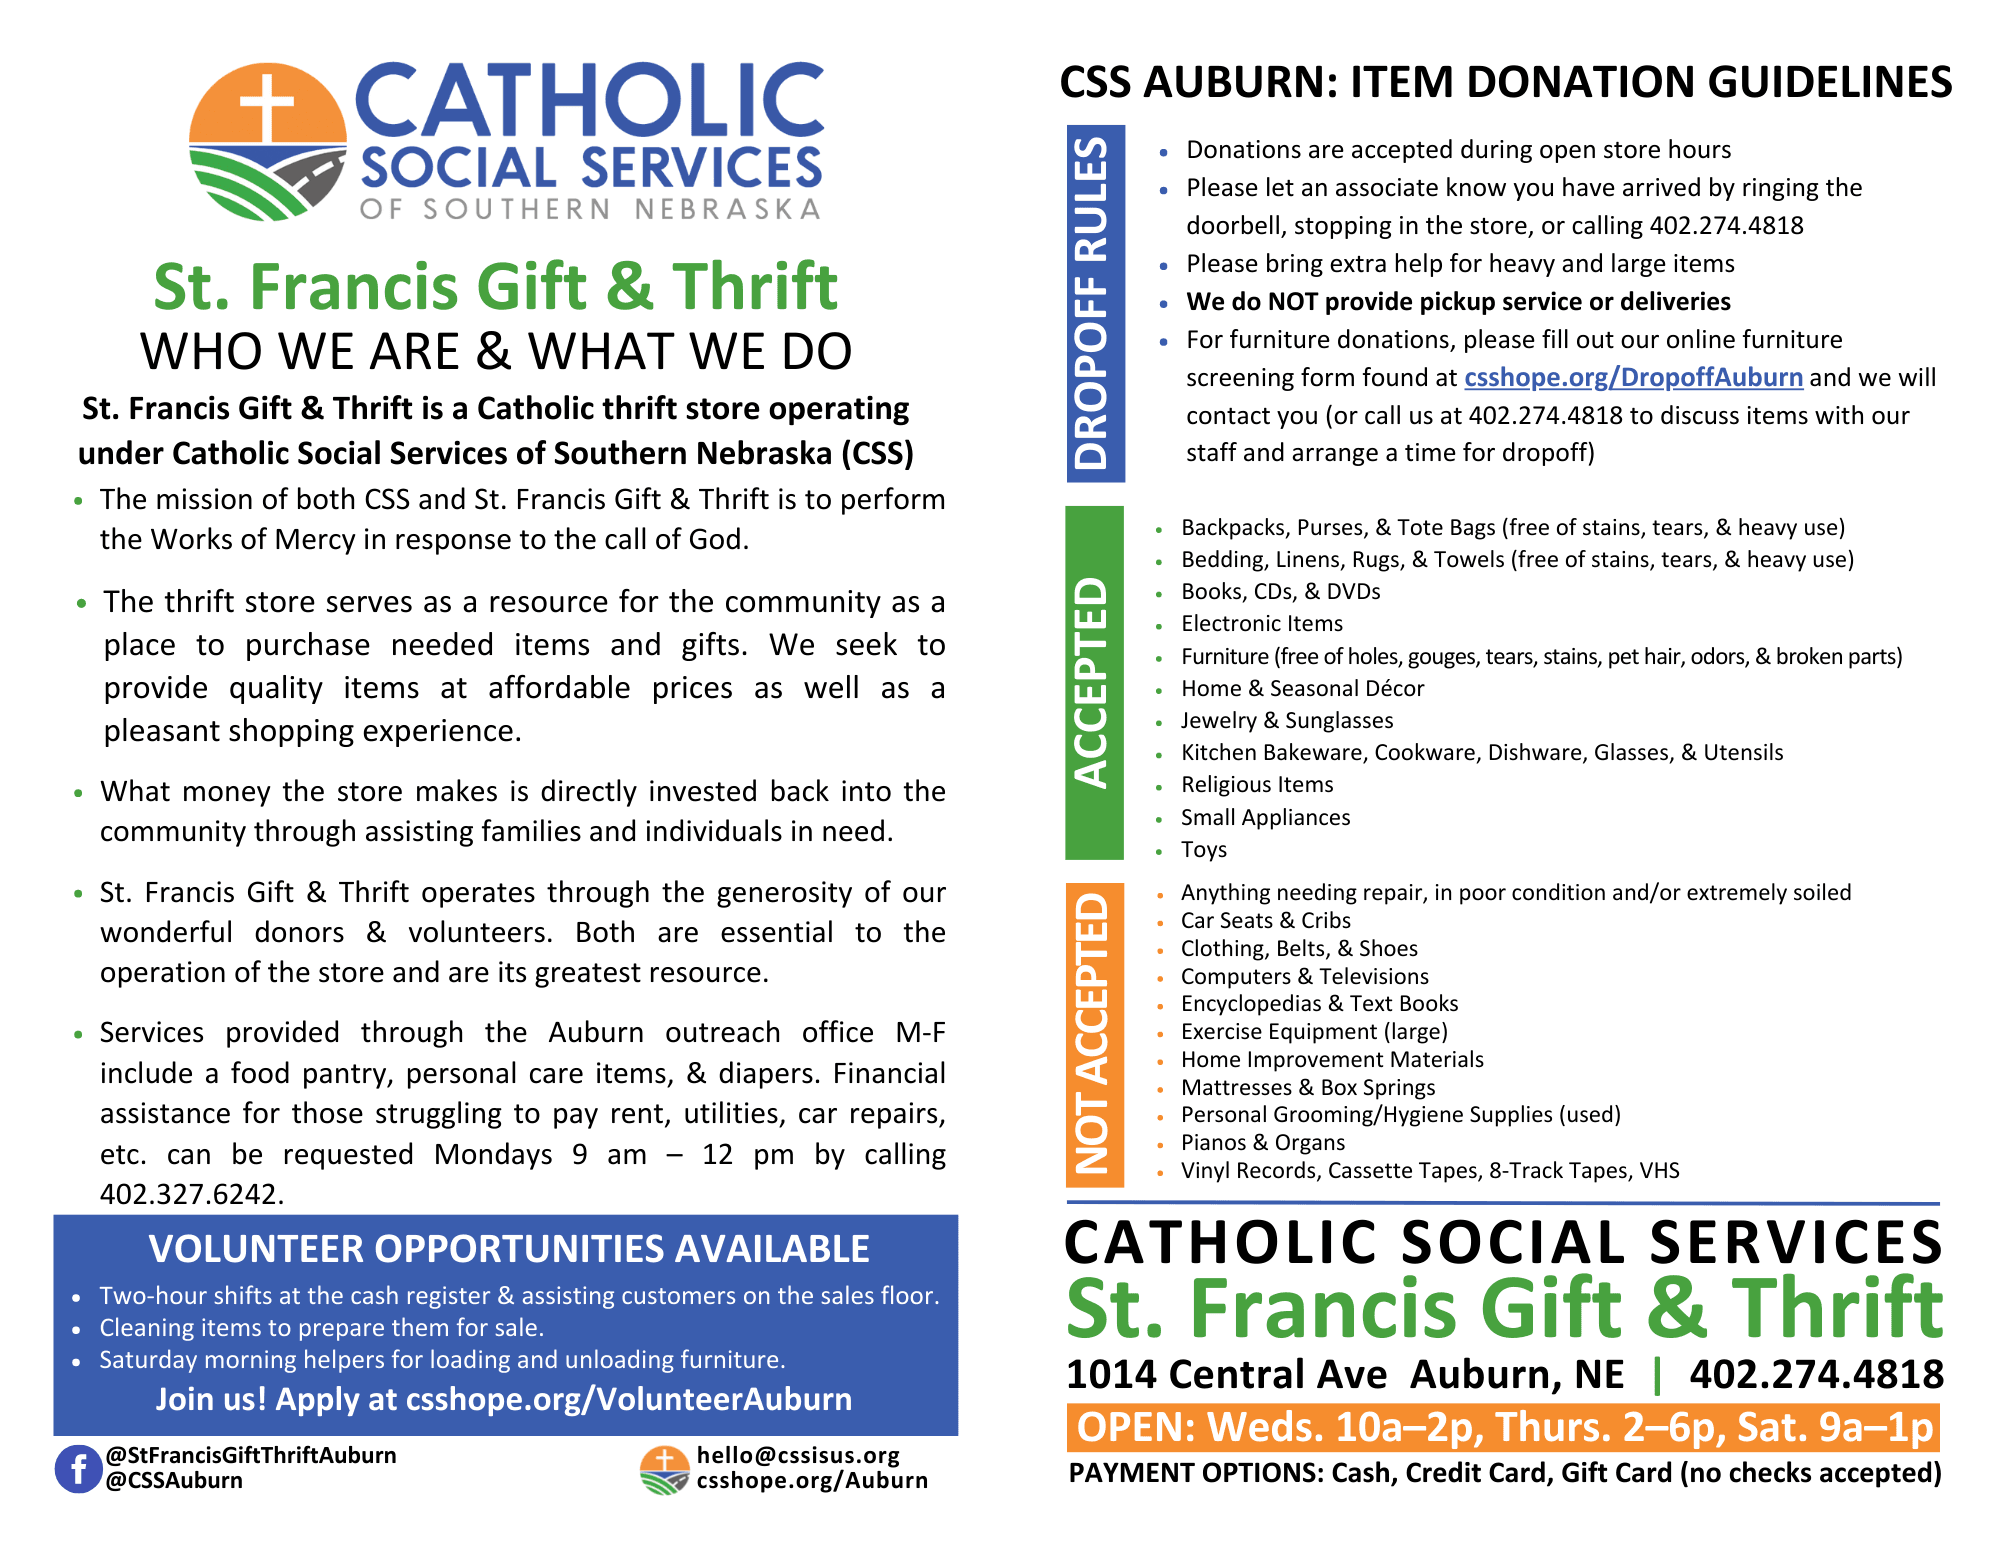 UPDATE! St. Francis Gift & Thrift Item donation guidelines and store information